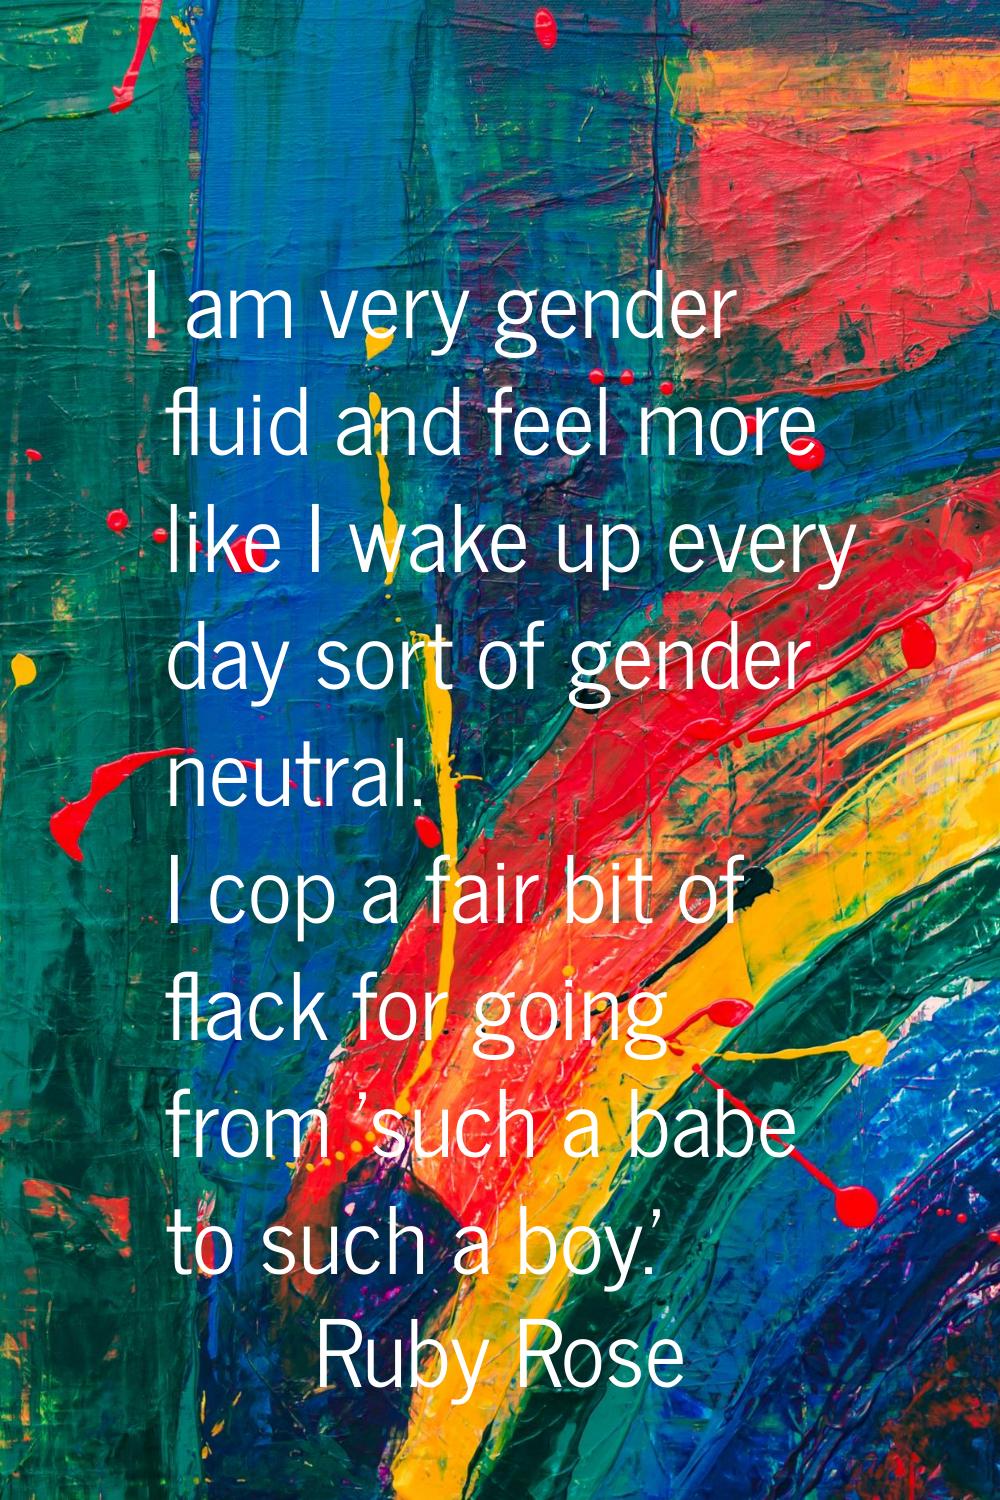 I am very gender fluid and feel more like I wake up every day sort of gender neutral. I cop a fair 